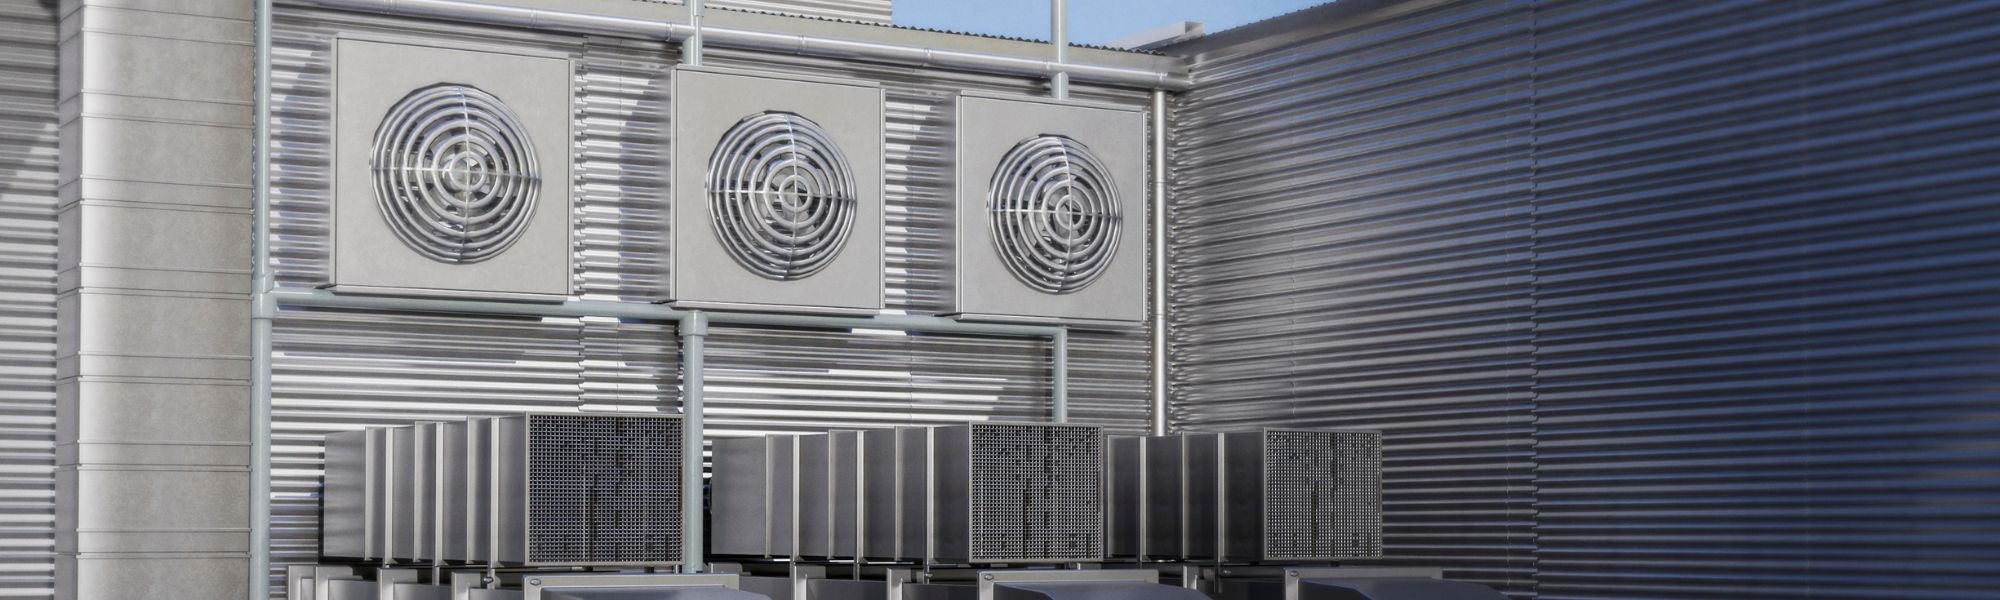  Using Artificial Intelligence to Improve HVAC Performance
